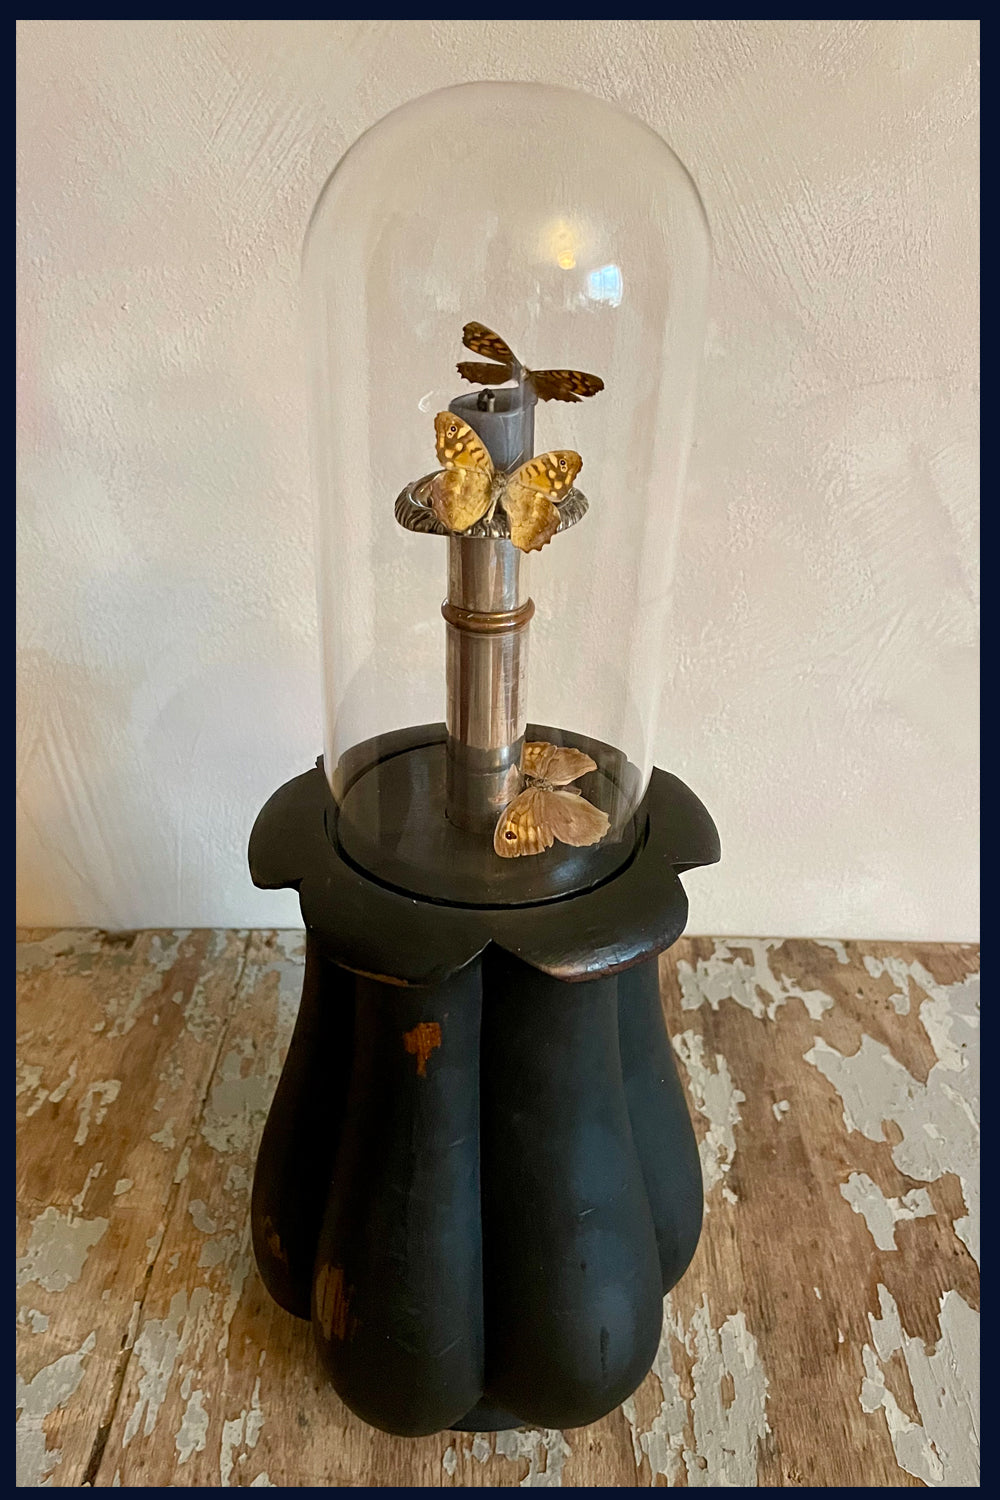 Enigma Variations Collection: Silver & Copper Antique Candlestick with a Vintage Butterfly in an Antique Display Dome